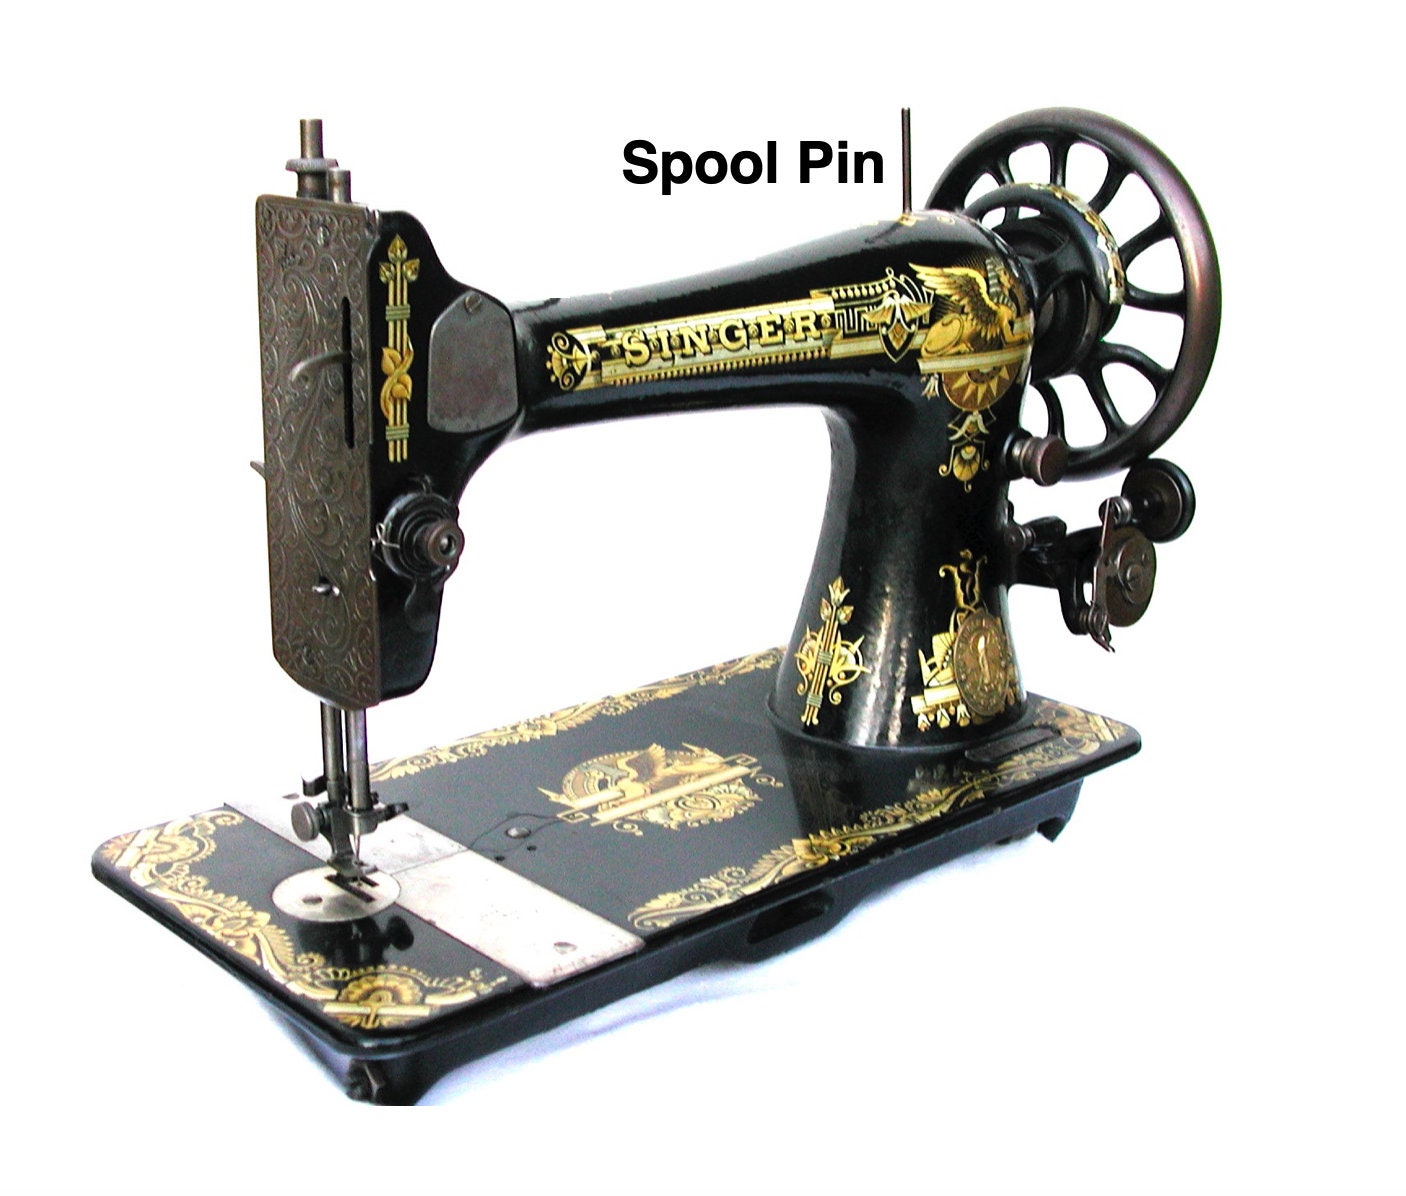 Thread Spool Tips for Vintage Sewing Machines